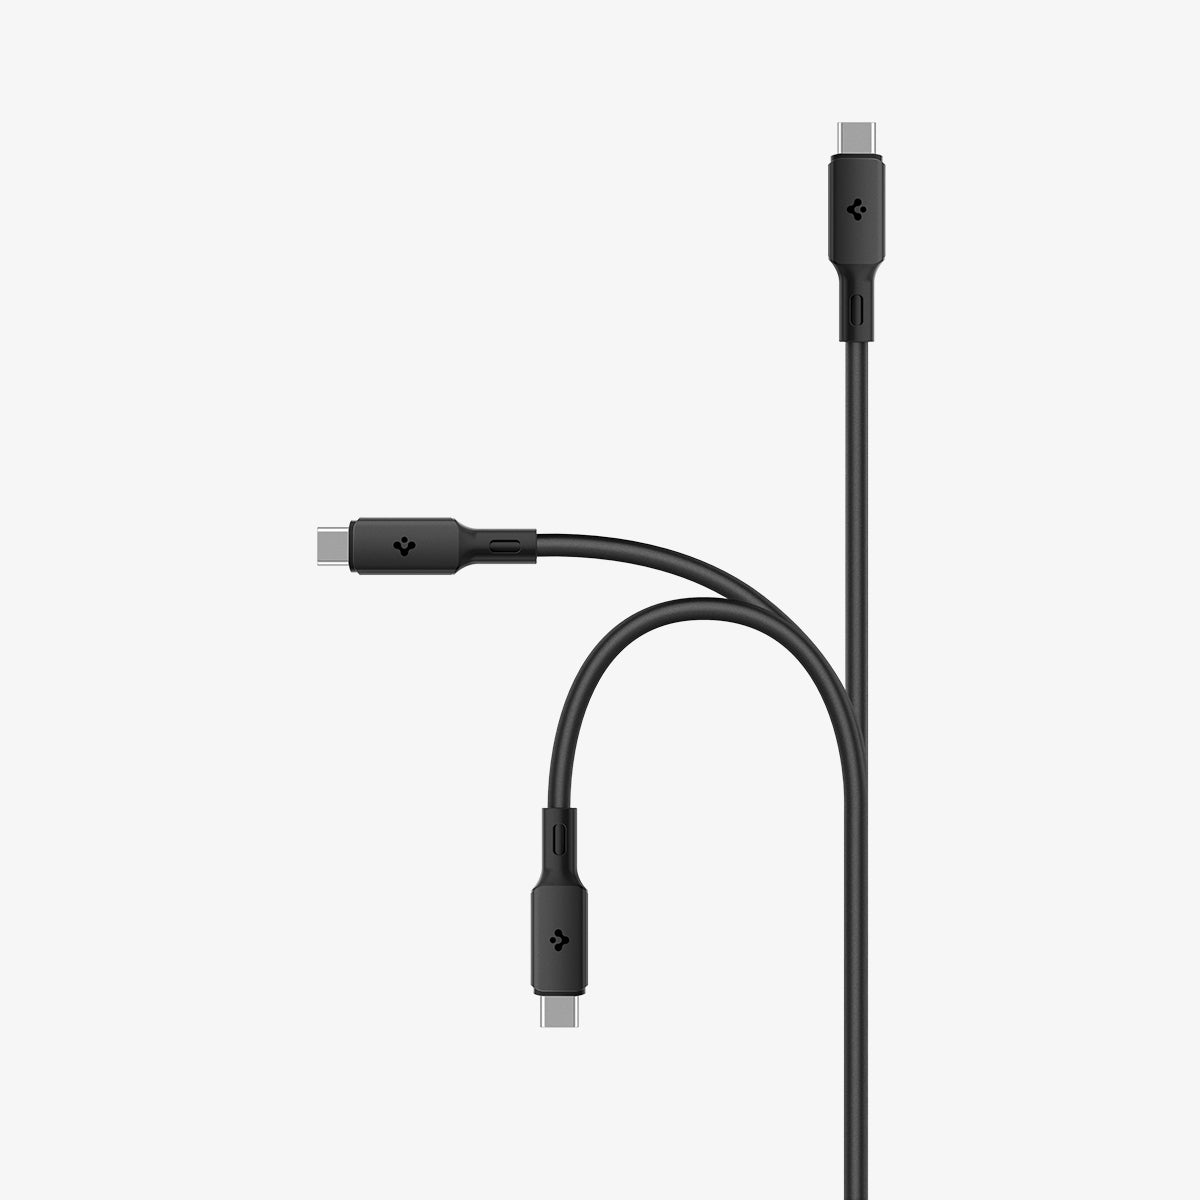 ACA06840 - ArcWire™ USB-C to USB-C Cable PB2203 in Black showing the 3 motion bending of a charging cable to show it's bending durability